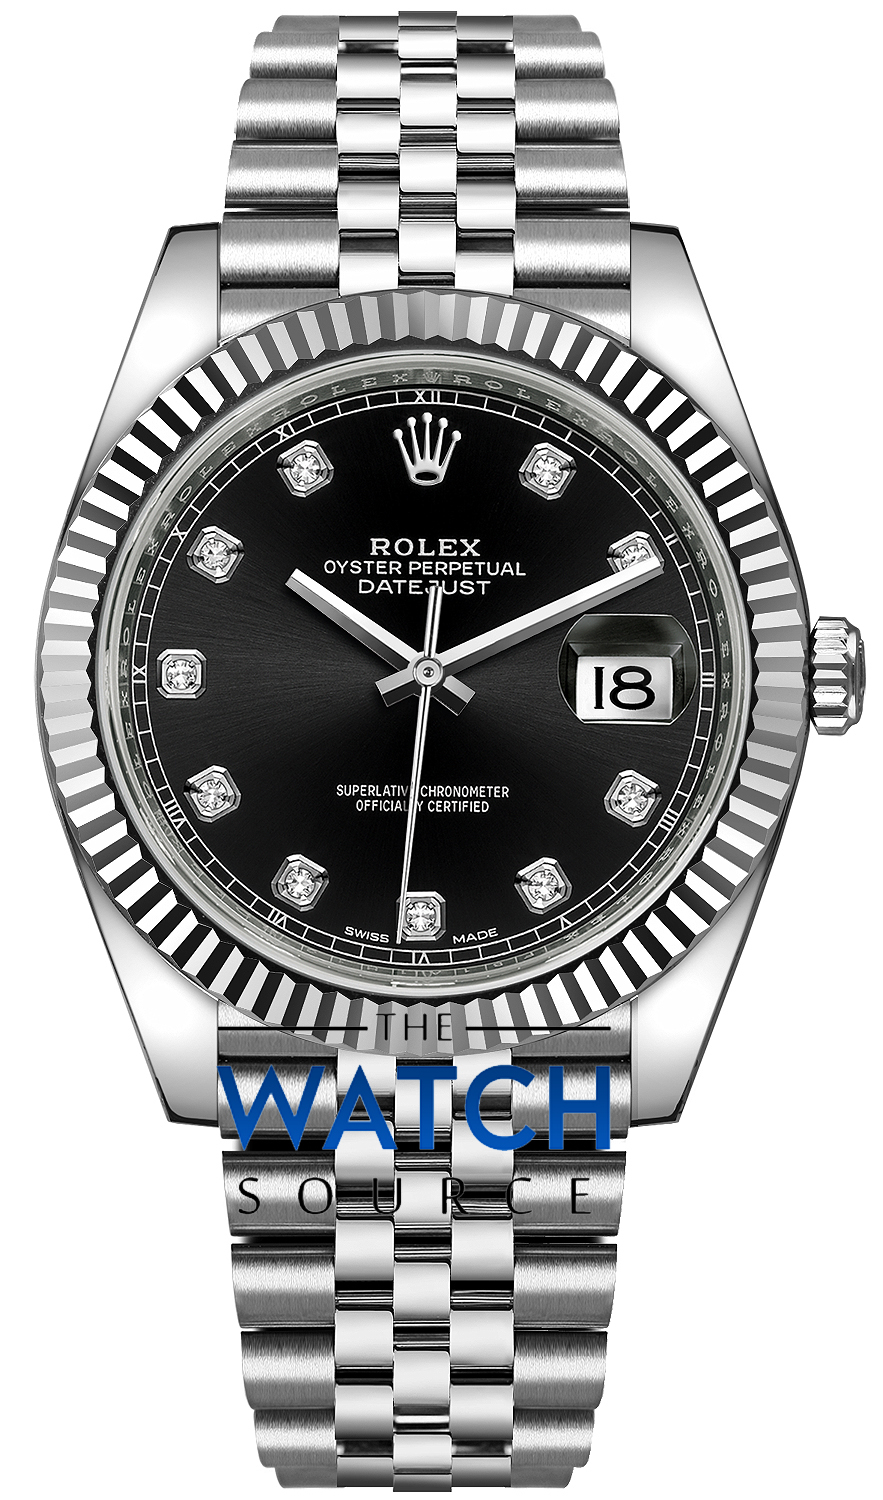 selvfølgelig galop Luksus Buy this new Rolex Datejust 41mm Stainless Steel 126334 Black Diamond  Jubilee mens watch for the discount price of £14,700.00. UK Retailer.